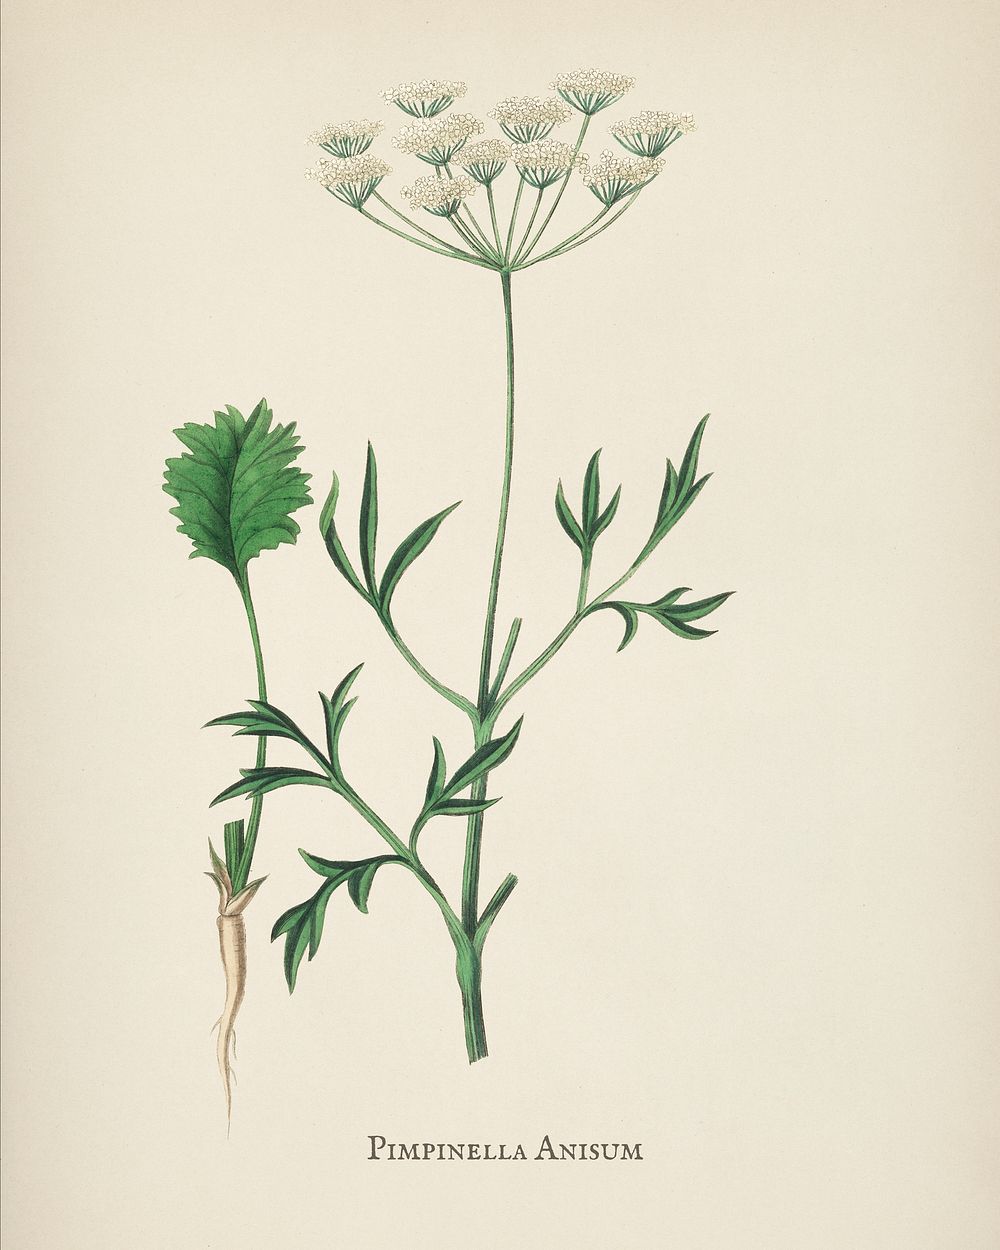 Aniseed (Pimpinella anisum) illustration from Medical Botany (1836) by John Stephenson and James Morss Churchill.